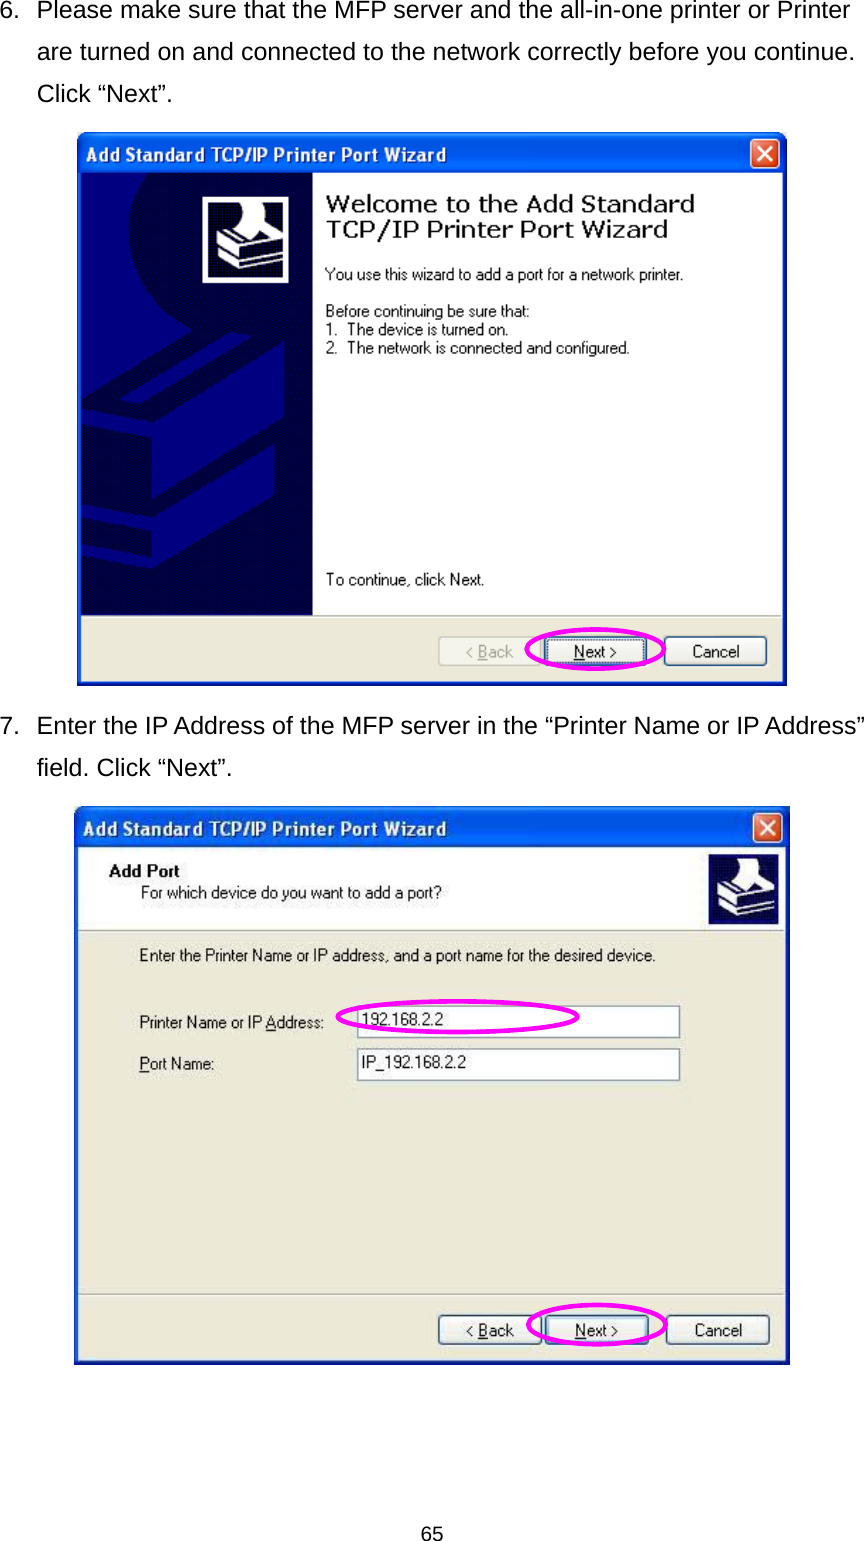 65 6.  Please make sure that the MFP server and the all-in-one printer or Printer are turned on and connected to the network correctly before you continue. Click “Next”.  7.  Enter the IP Address of the MFP server in the “Printer Name or IP Address” field. Click “Next”.   